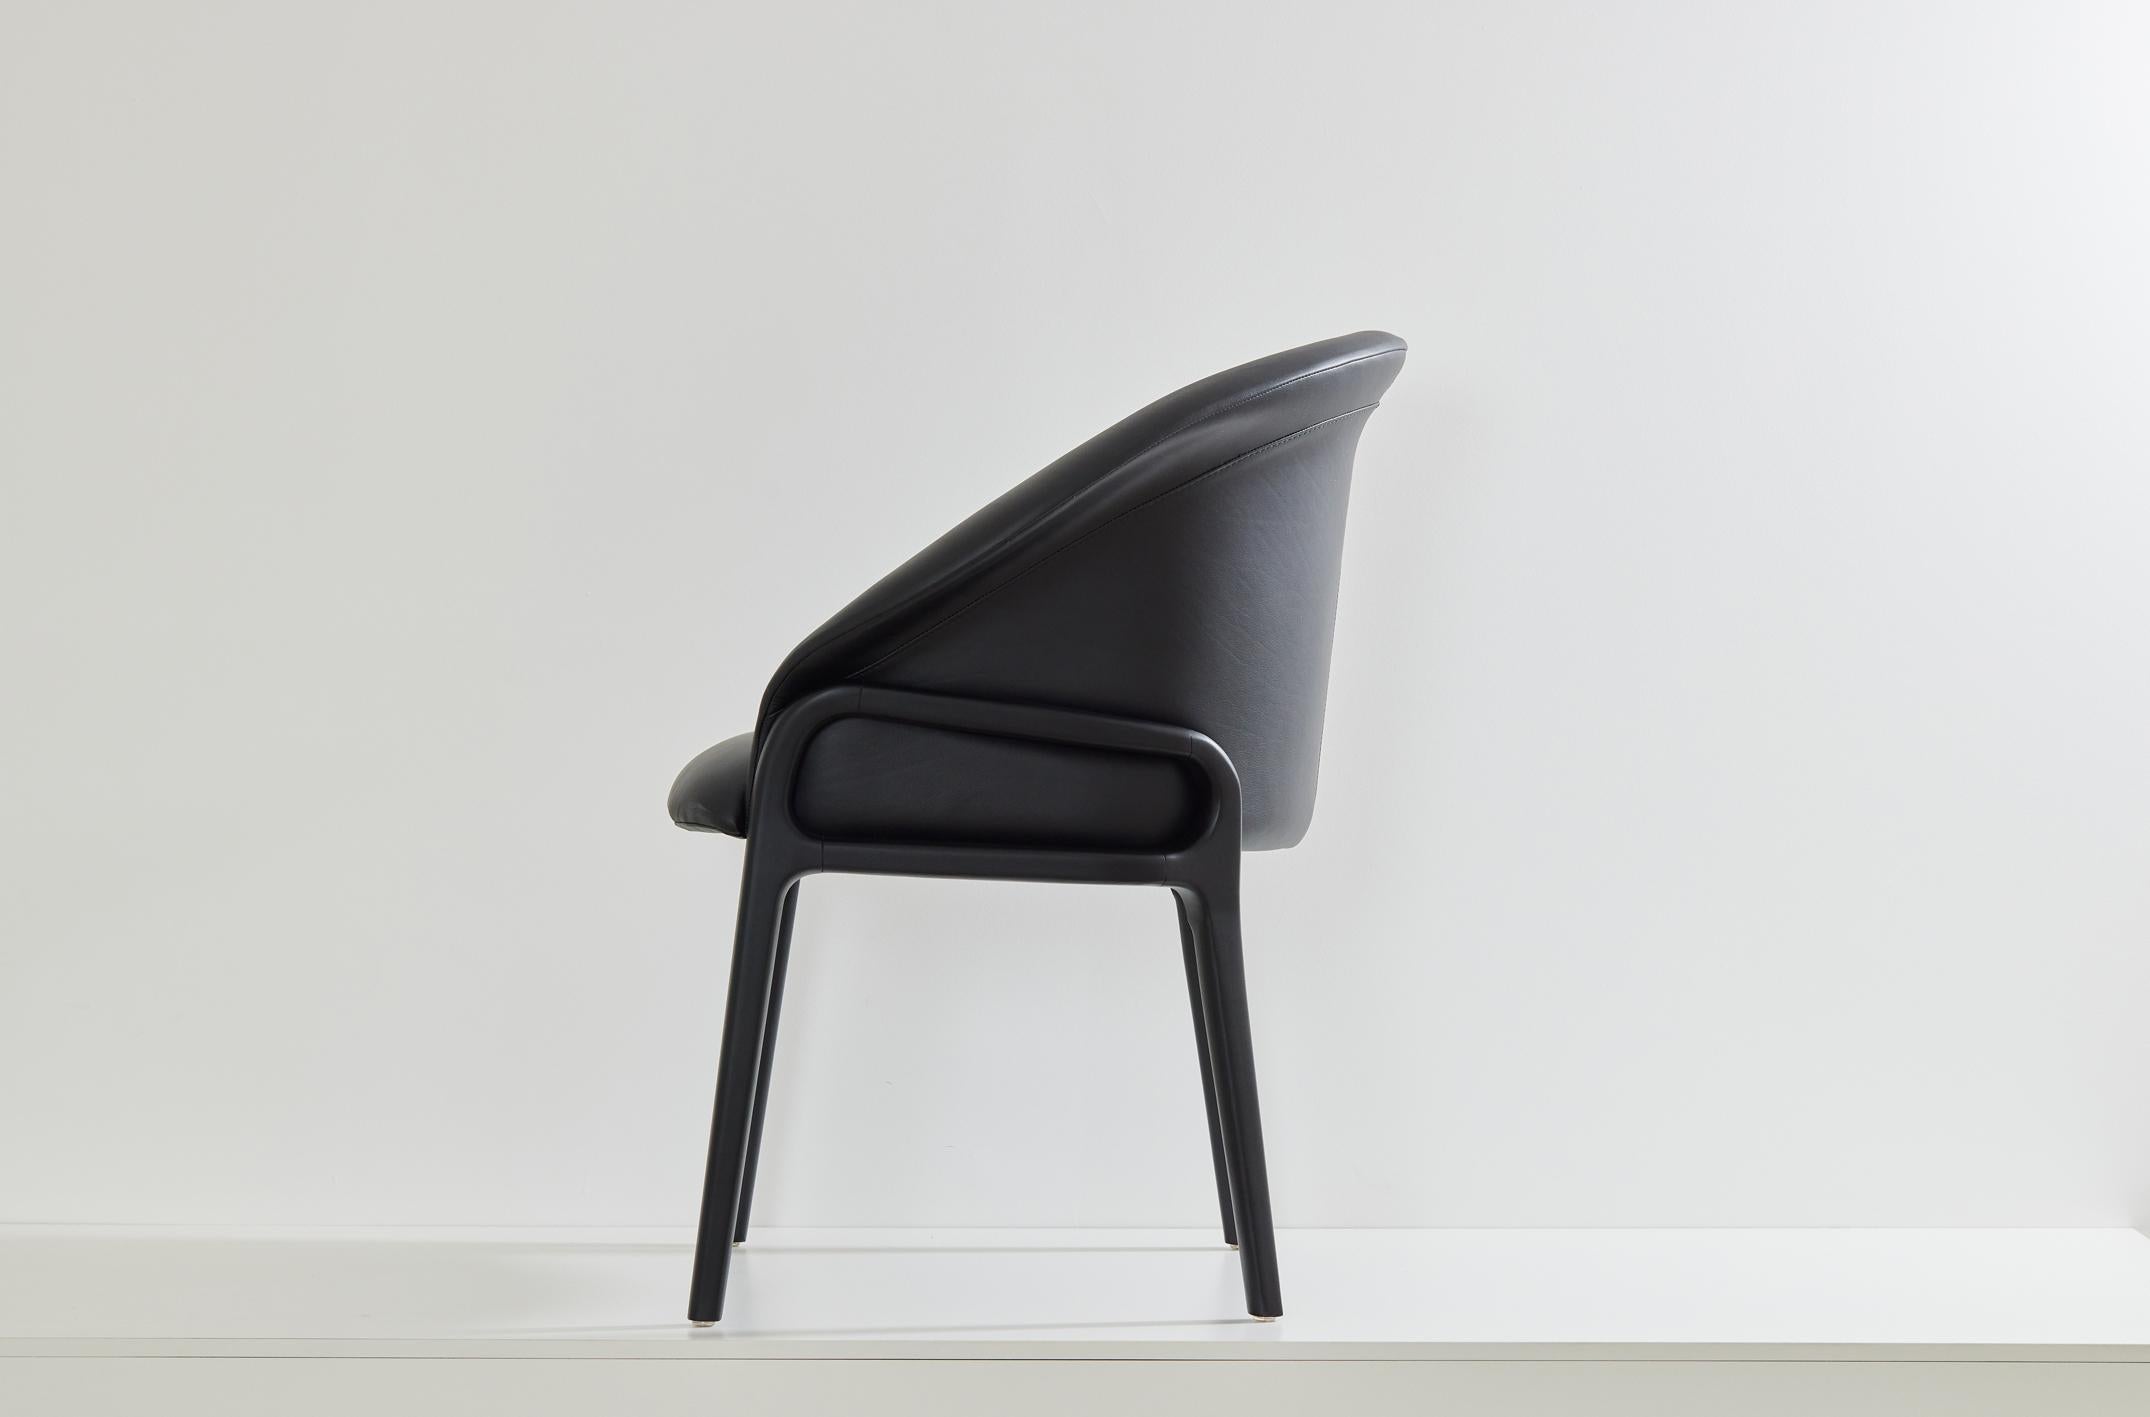 Brazilian Minimalist Organic Chair in black Solid Wood, black leather Seating For Sale